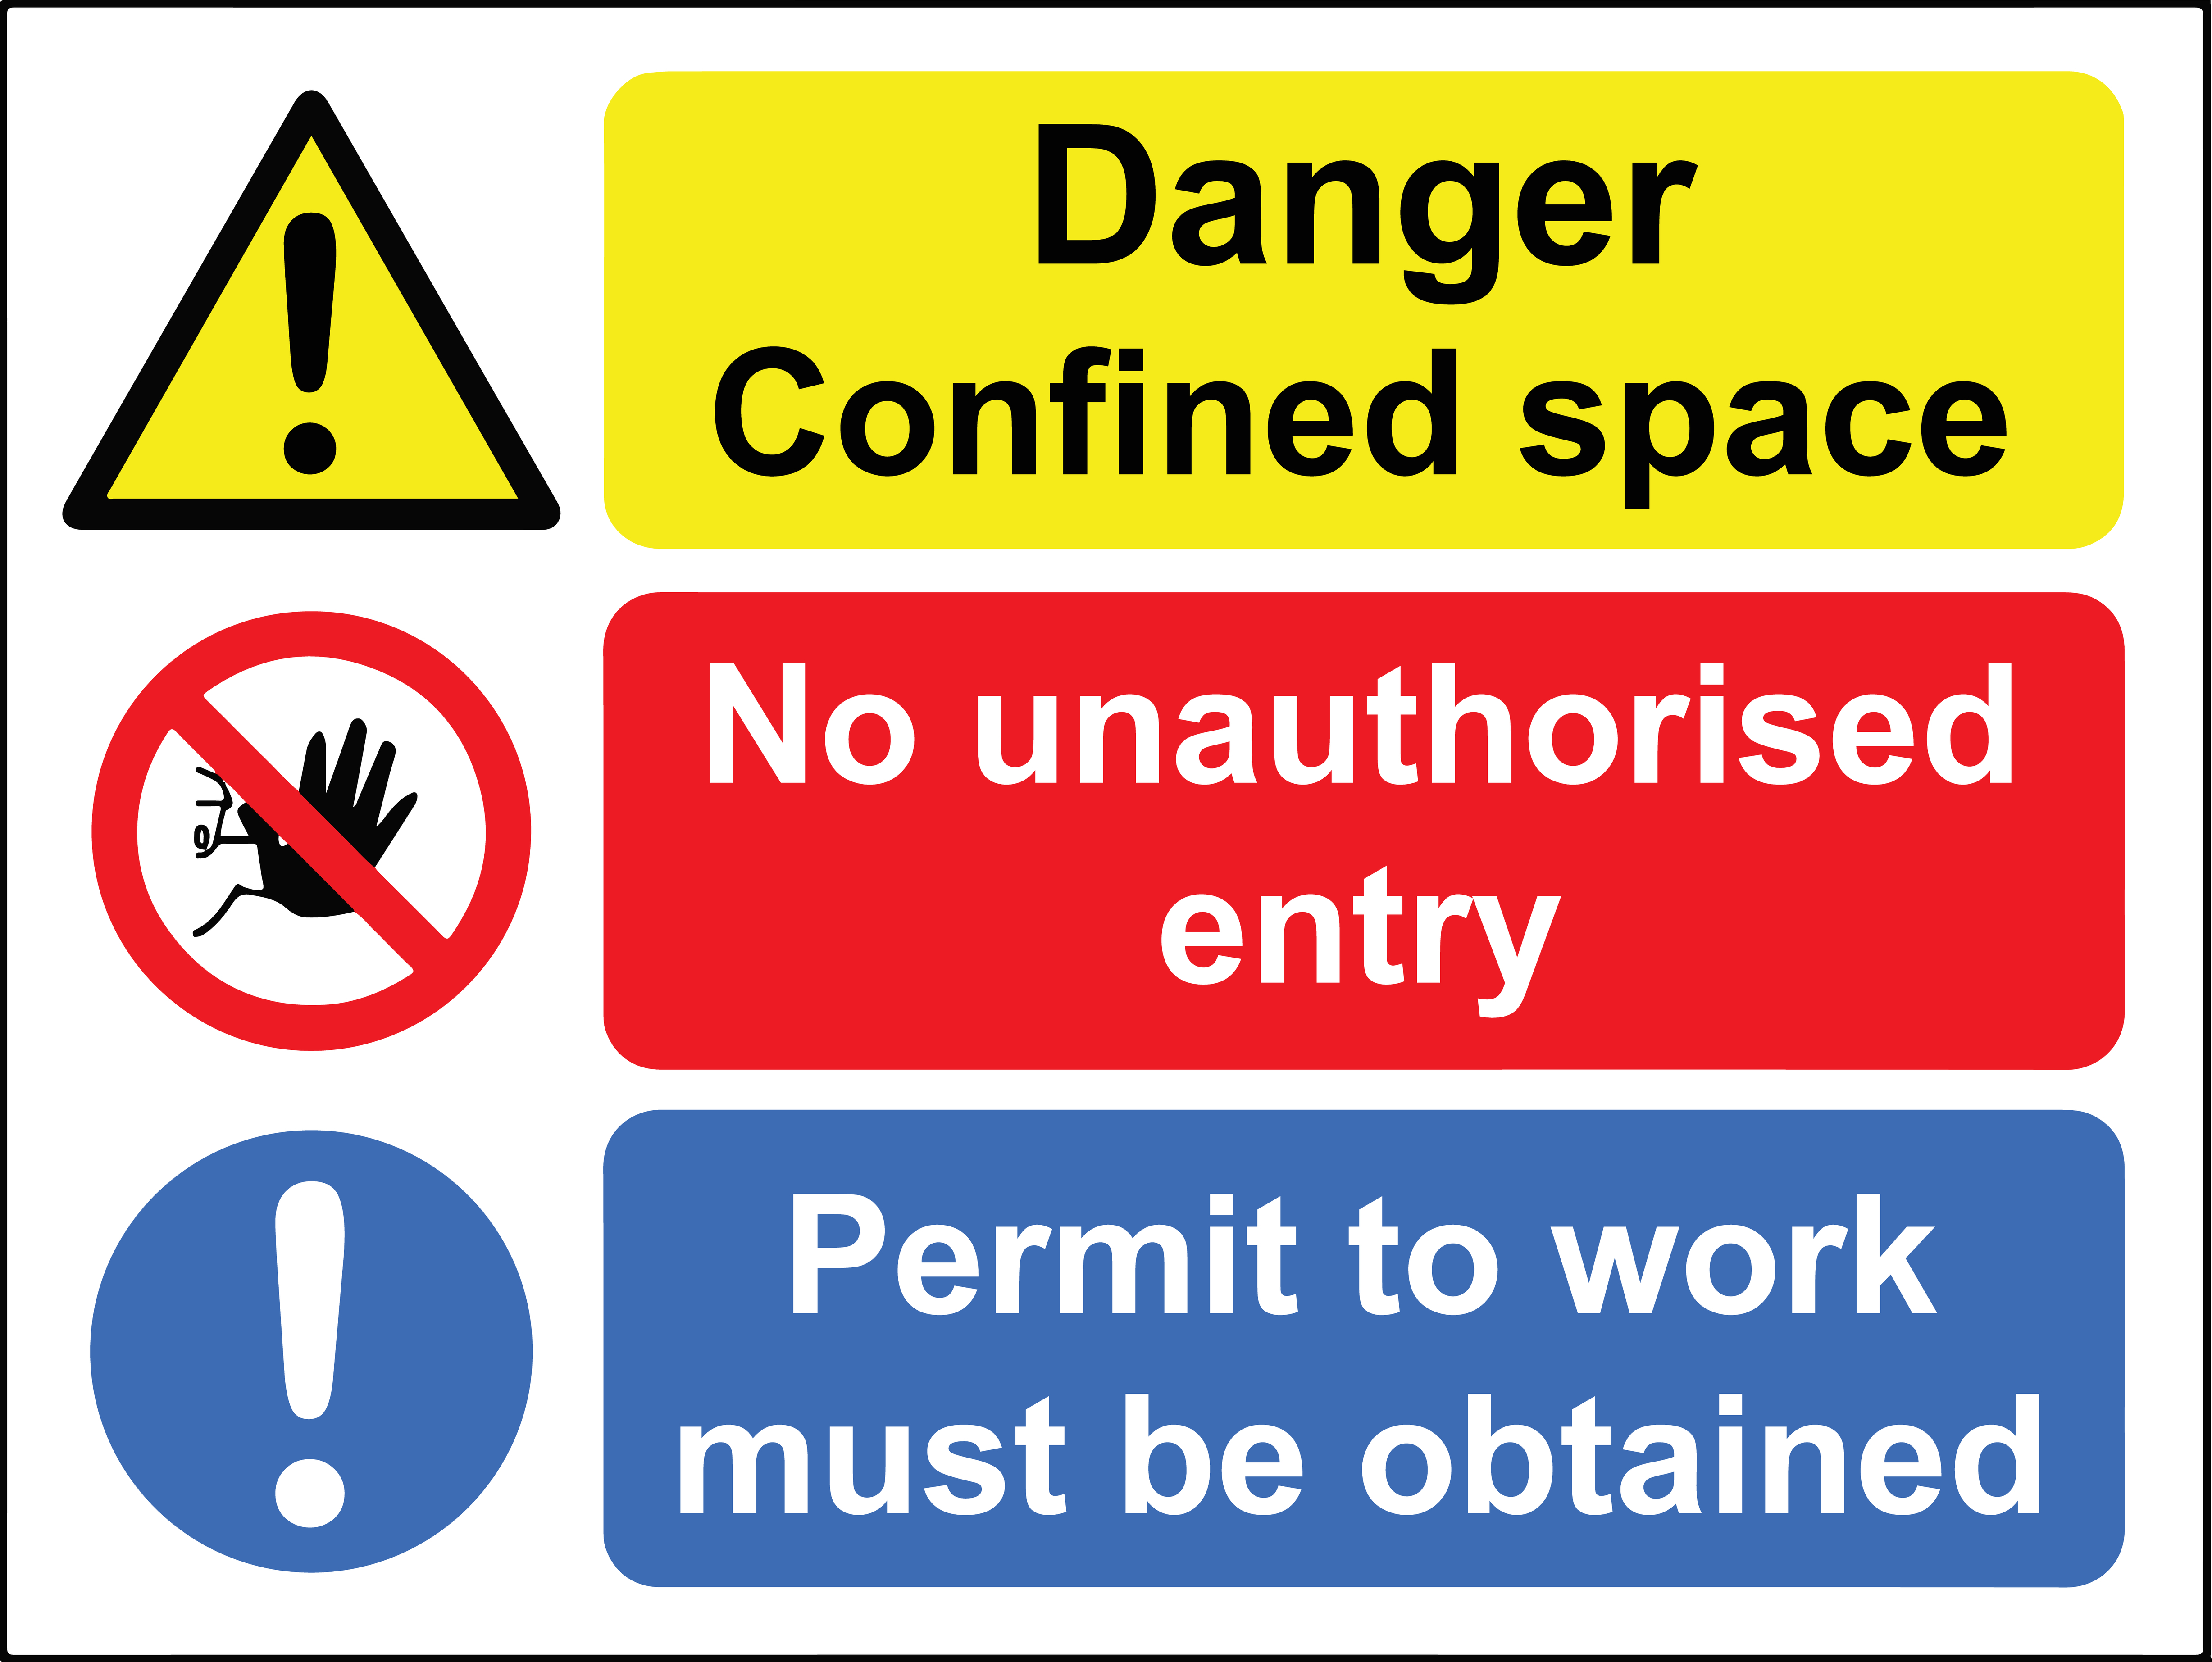 Three health & safety warning signs that would be typical to see at a construction site